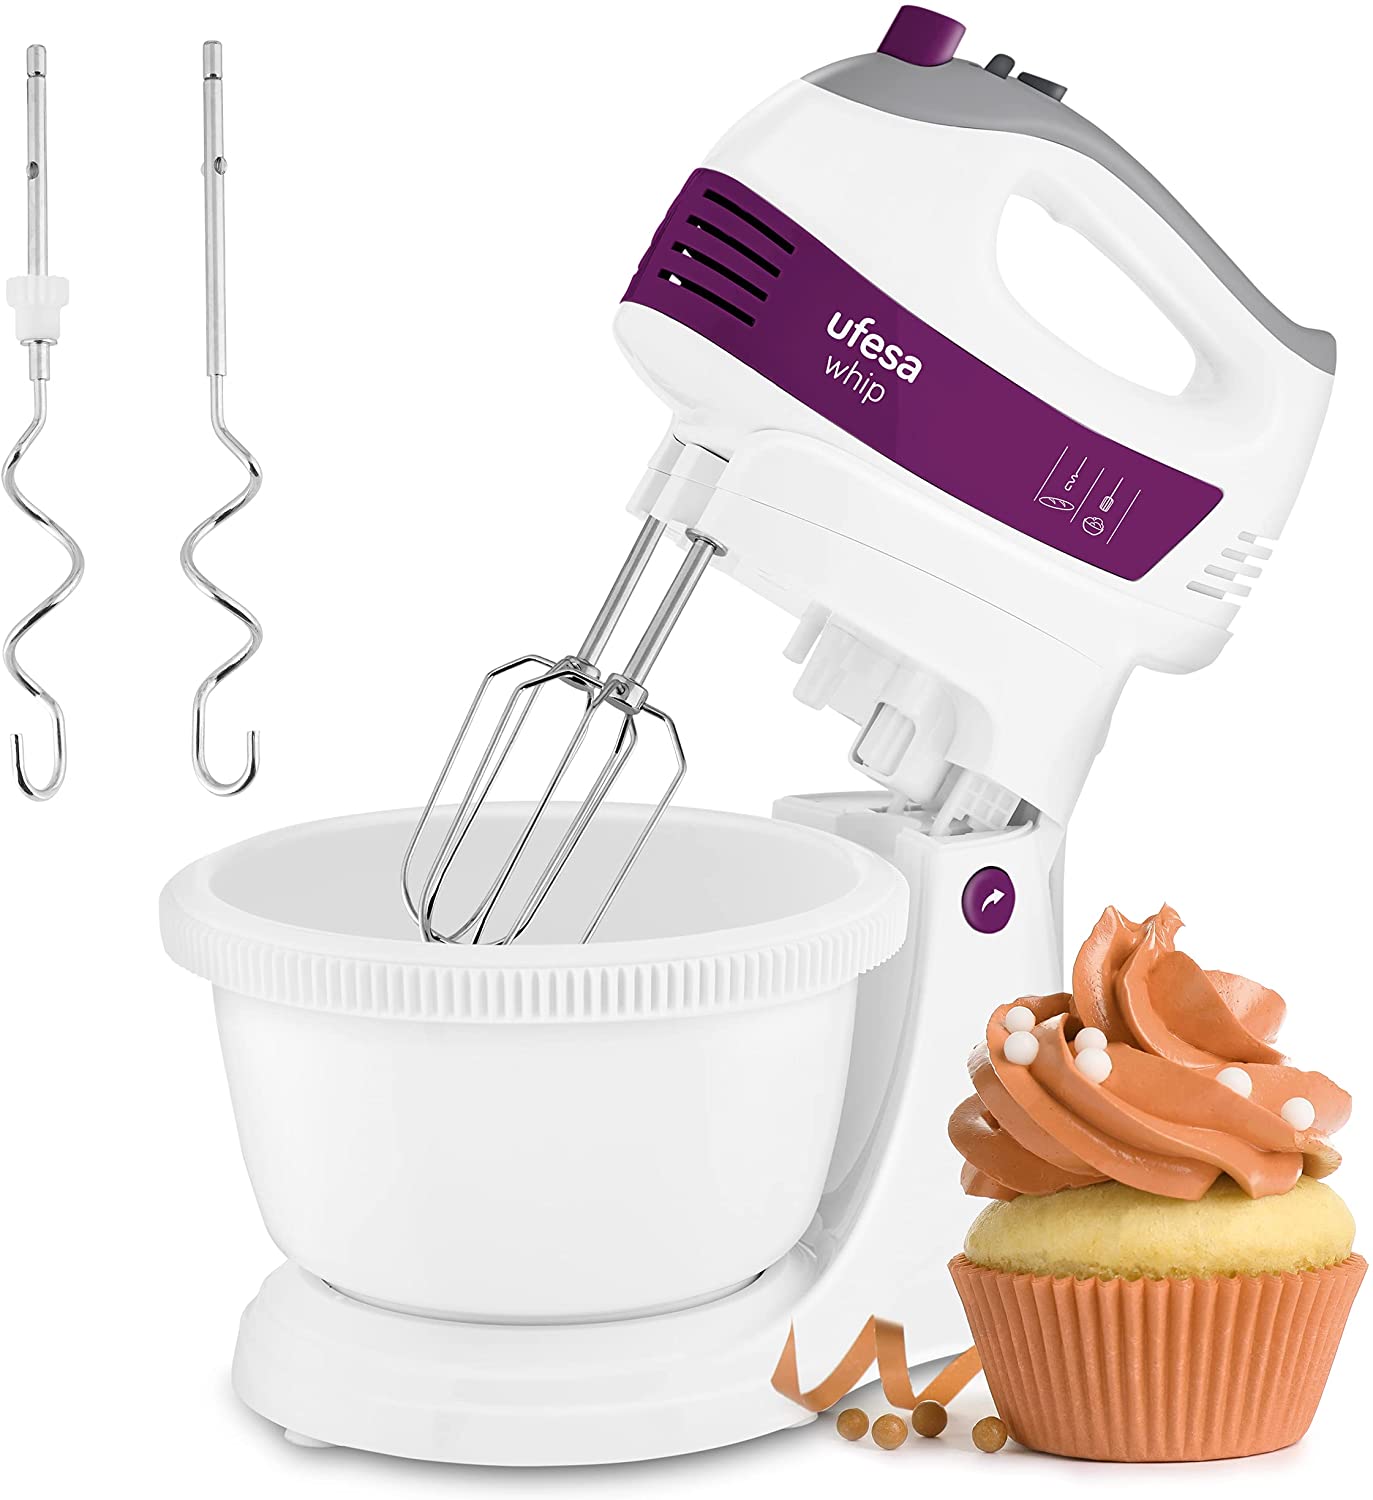 Ufesa BV4655 Electric Hand Mixer with Mixing Bowl Food Processor - Kneading Machine - 400 Watt - 2 in 1 Function - 5 Speed Levels - Turbo - 2 Dough Hooks - 2 Whisks - Soft Touch Handle